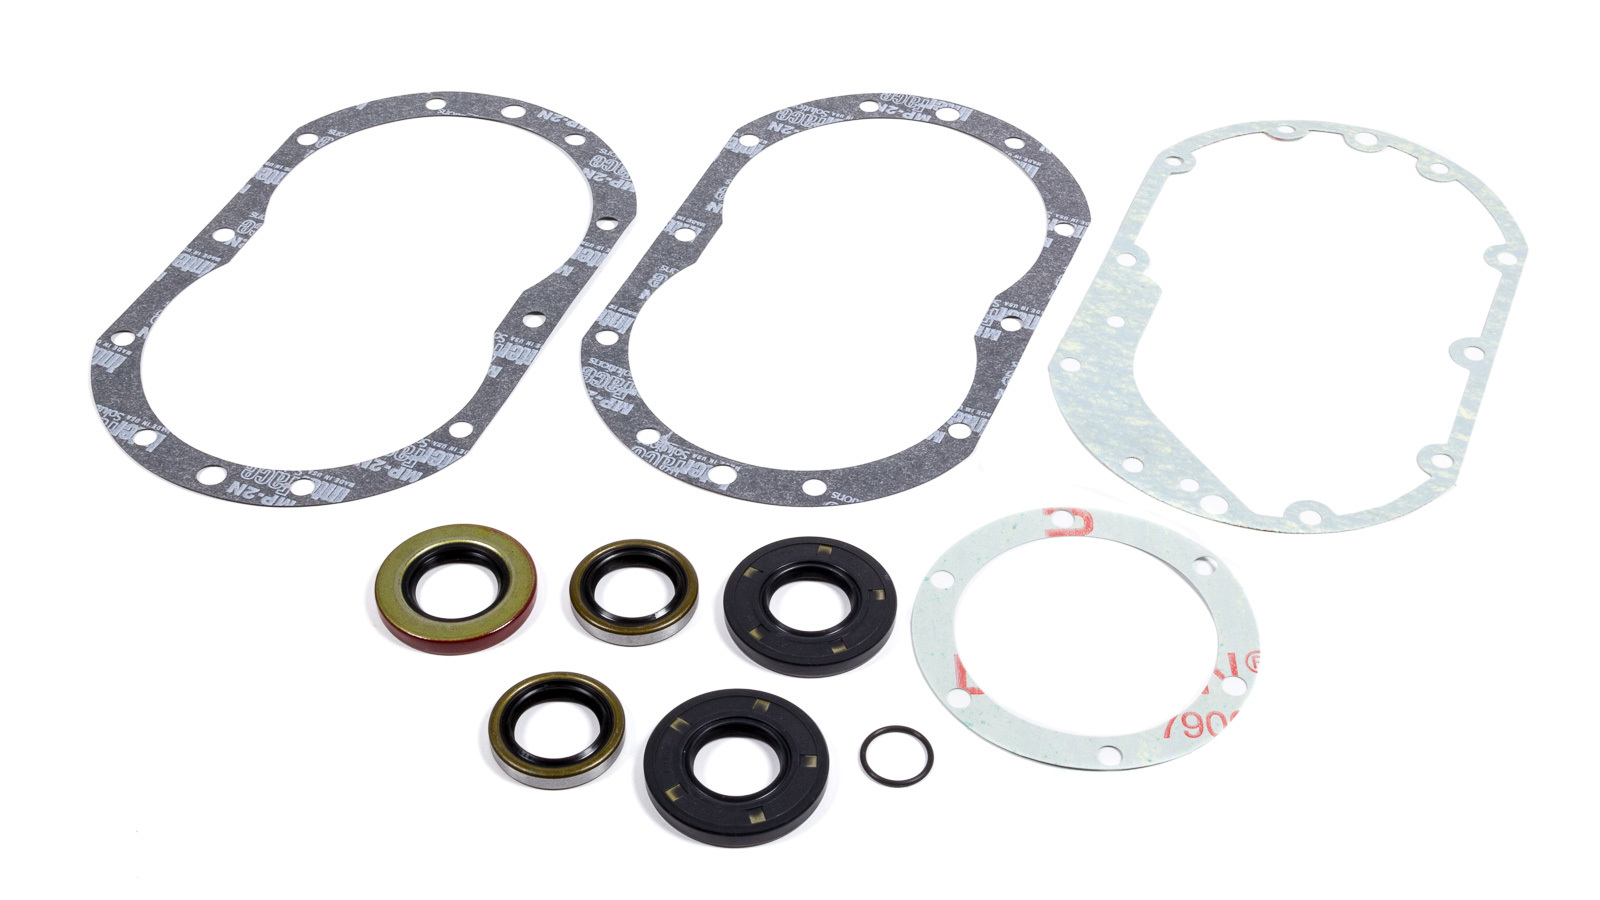 Seal & Gasket Kit - Weiand Supercharger